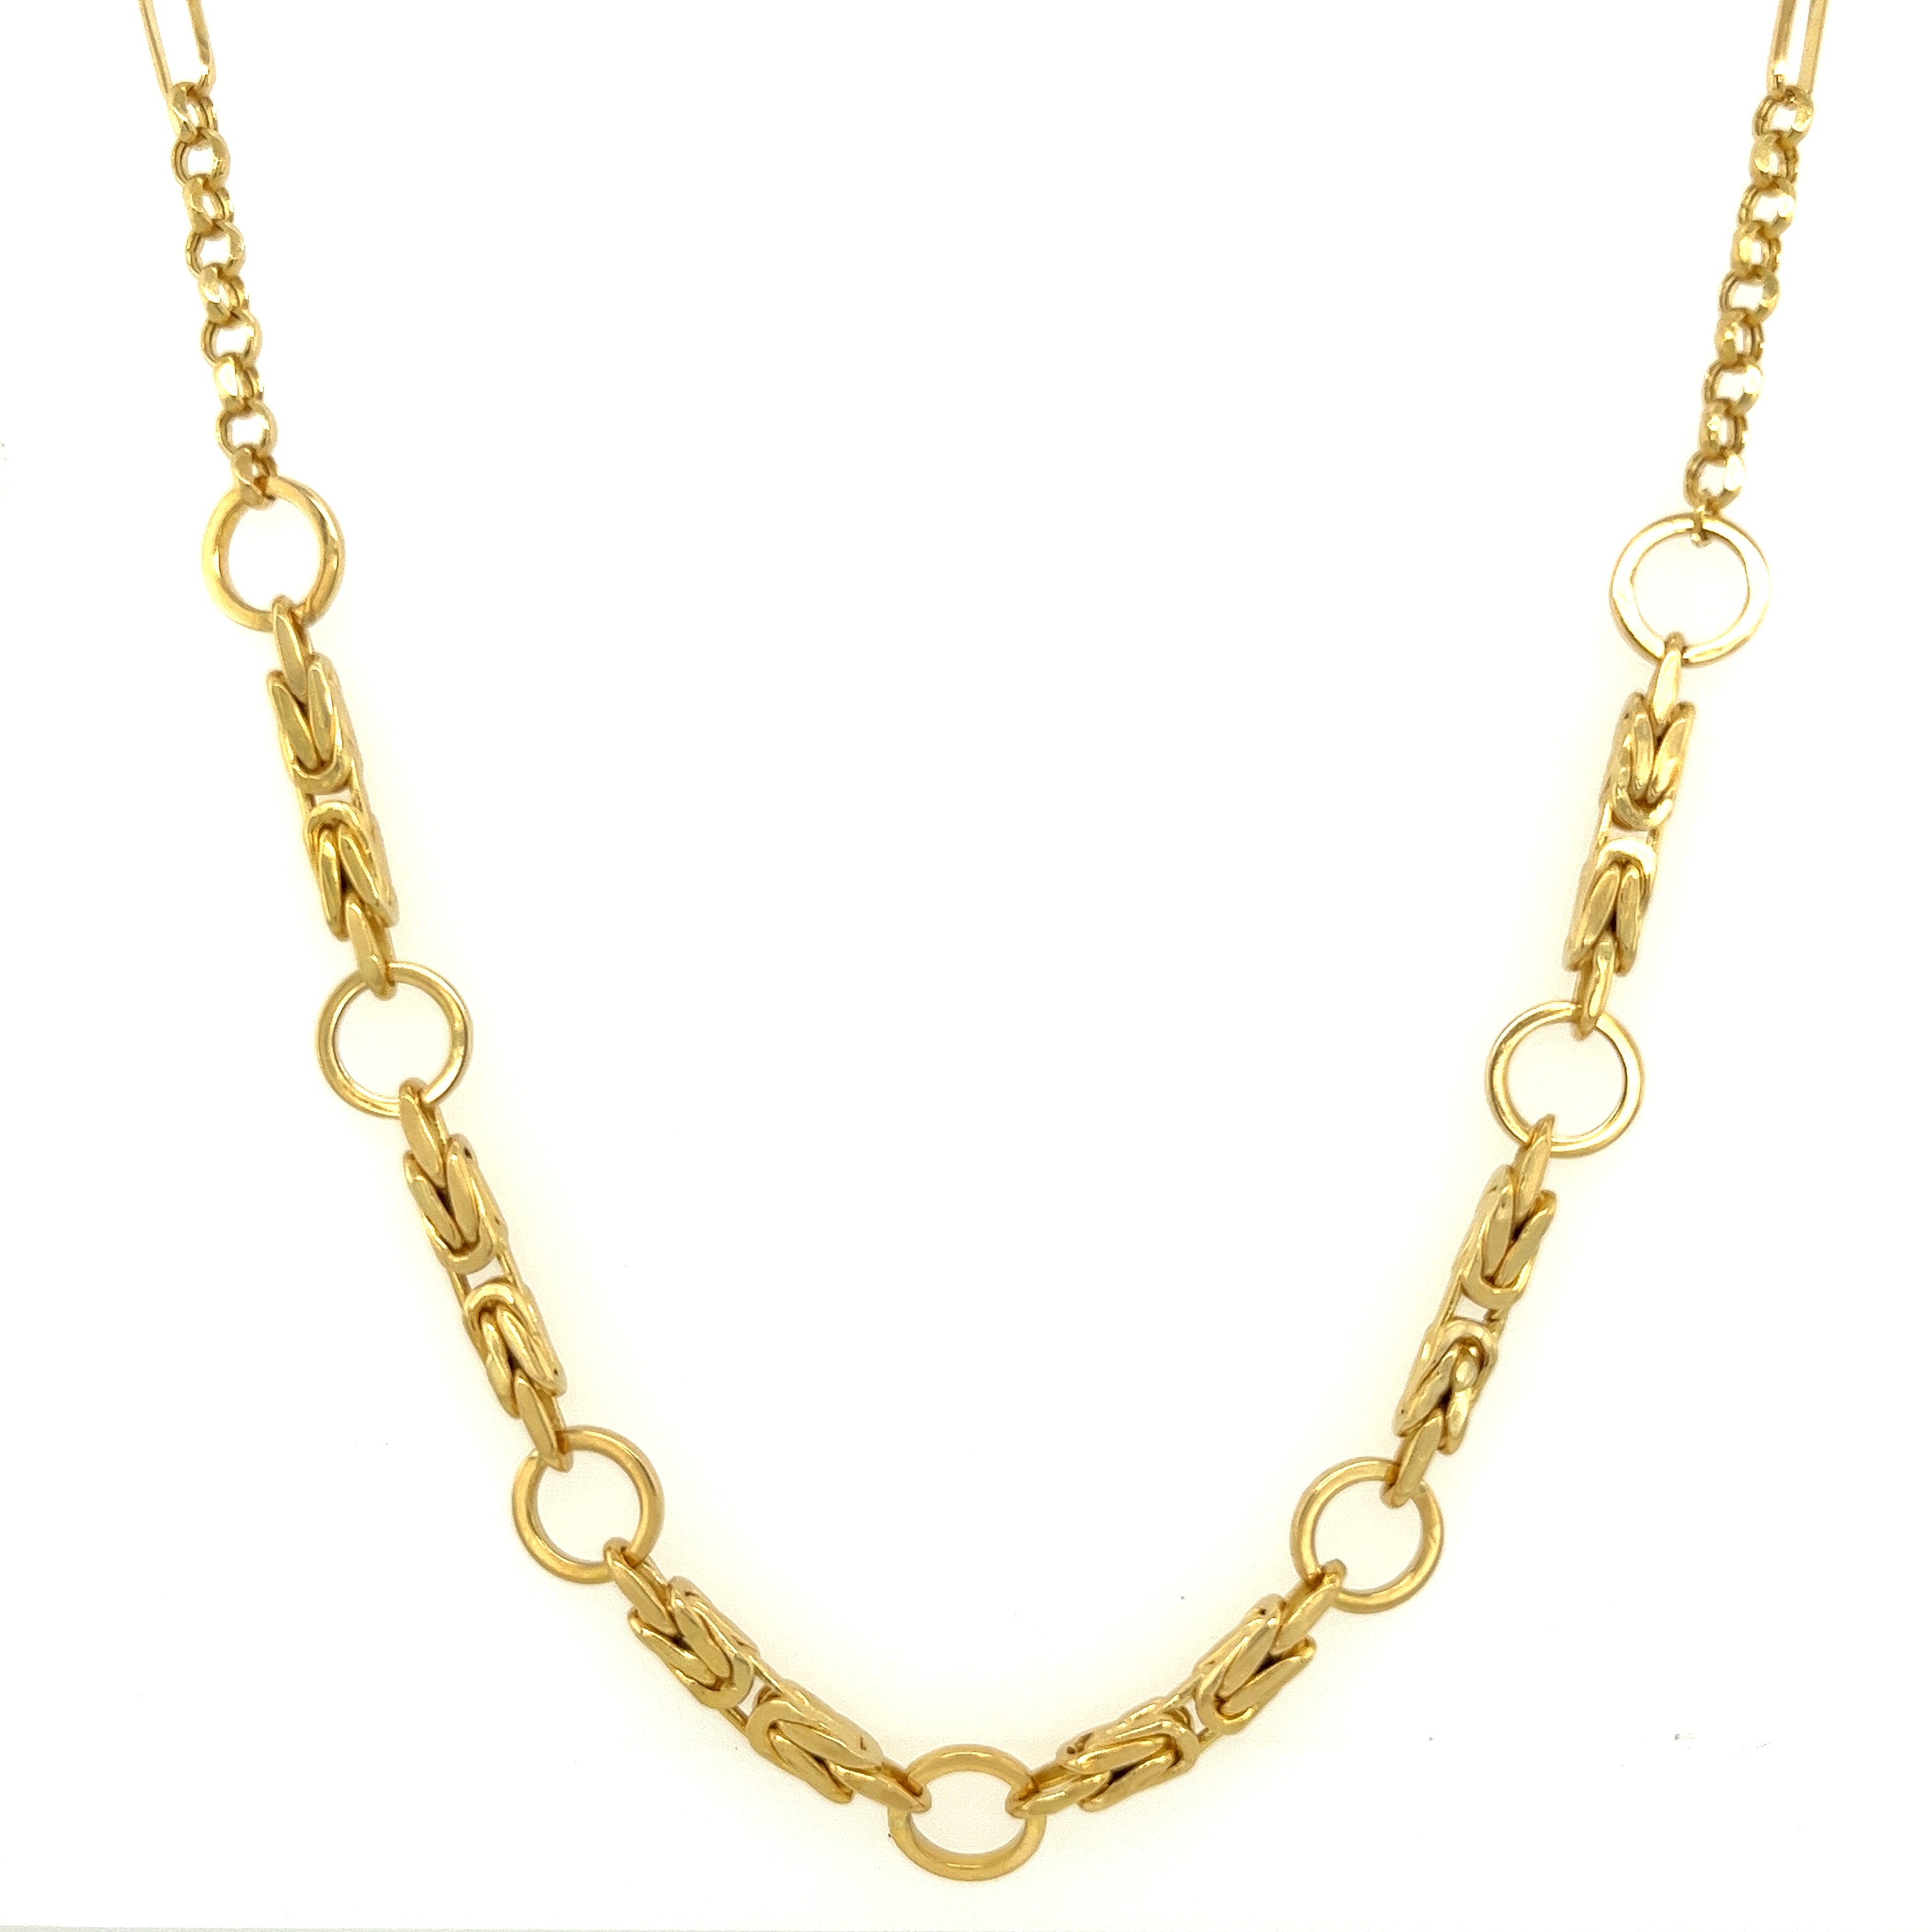 Beautiful gold connected necklace with a Circles in Yellow 18K Gold / M2ft037619p/y